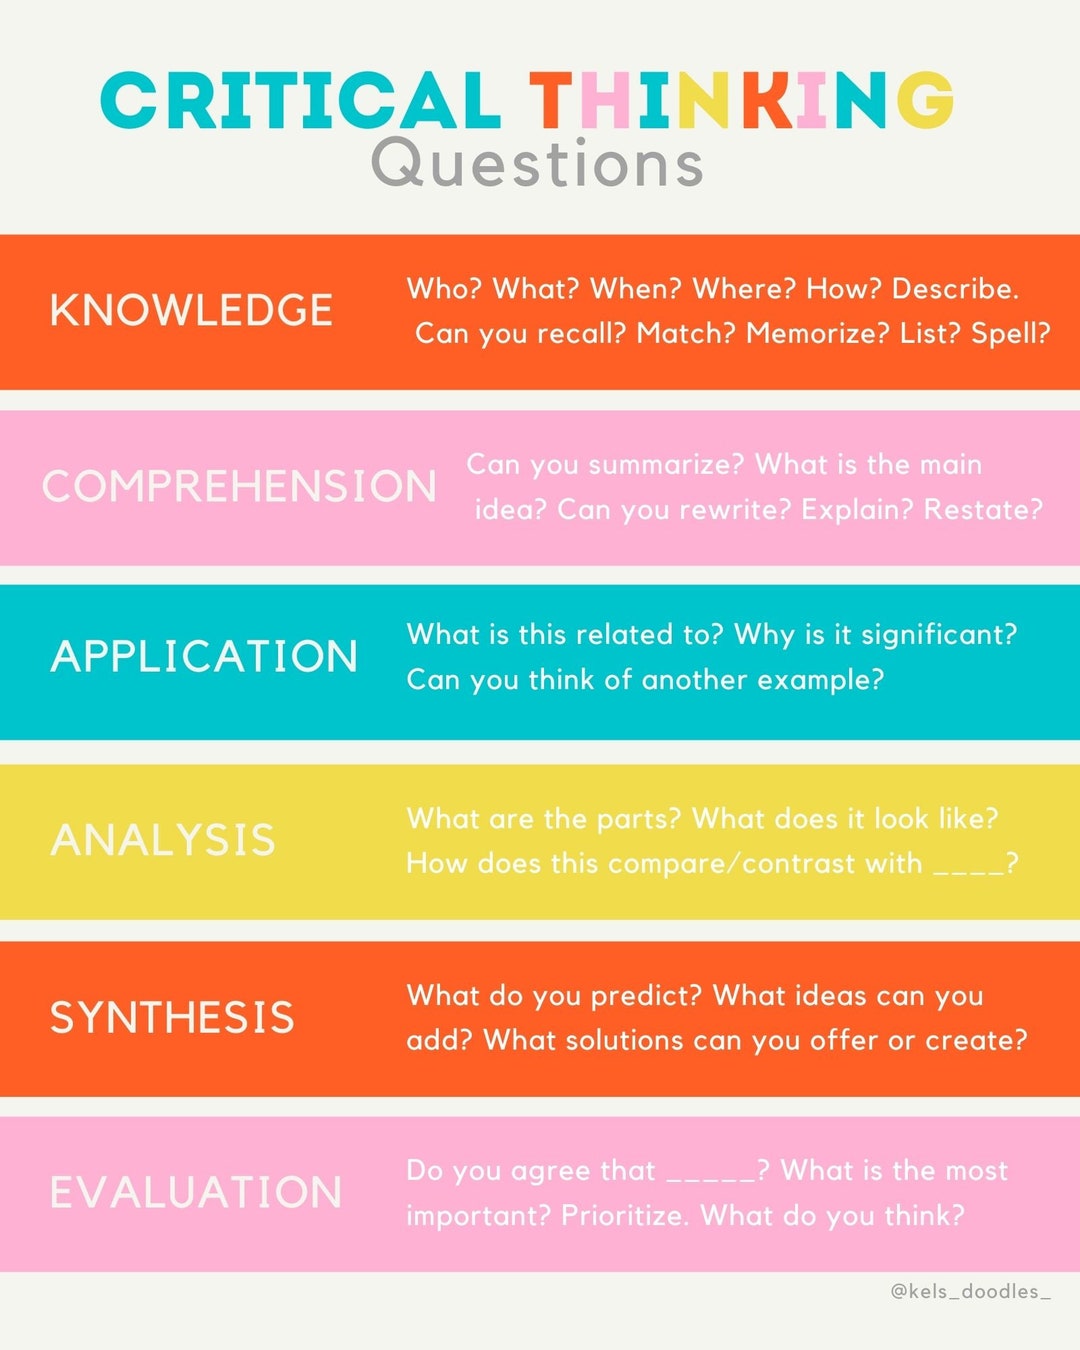 critical thinking based questions